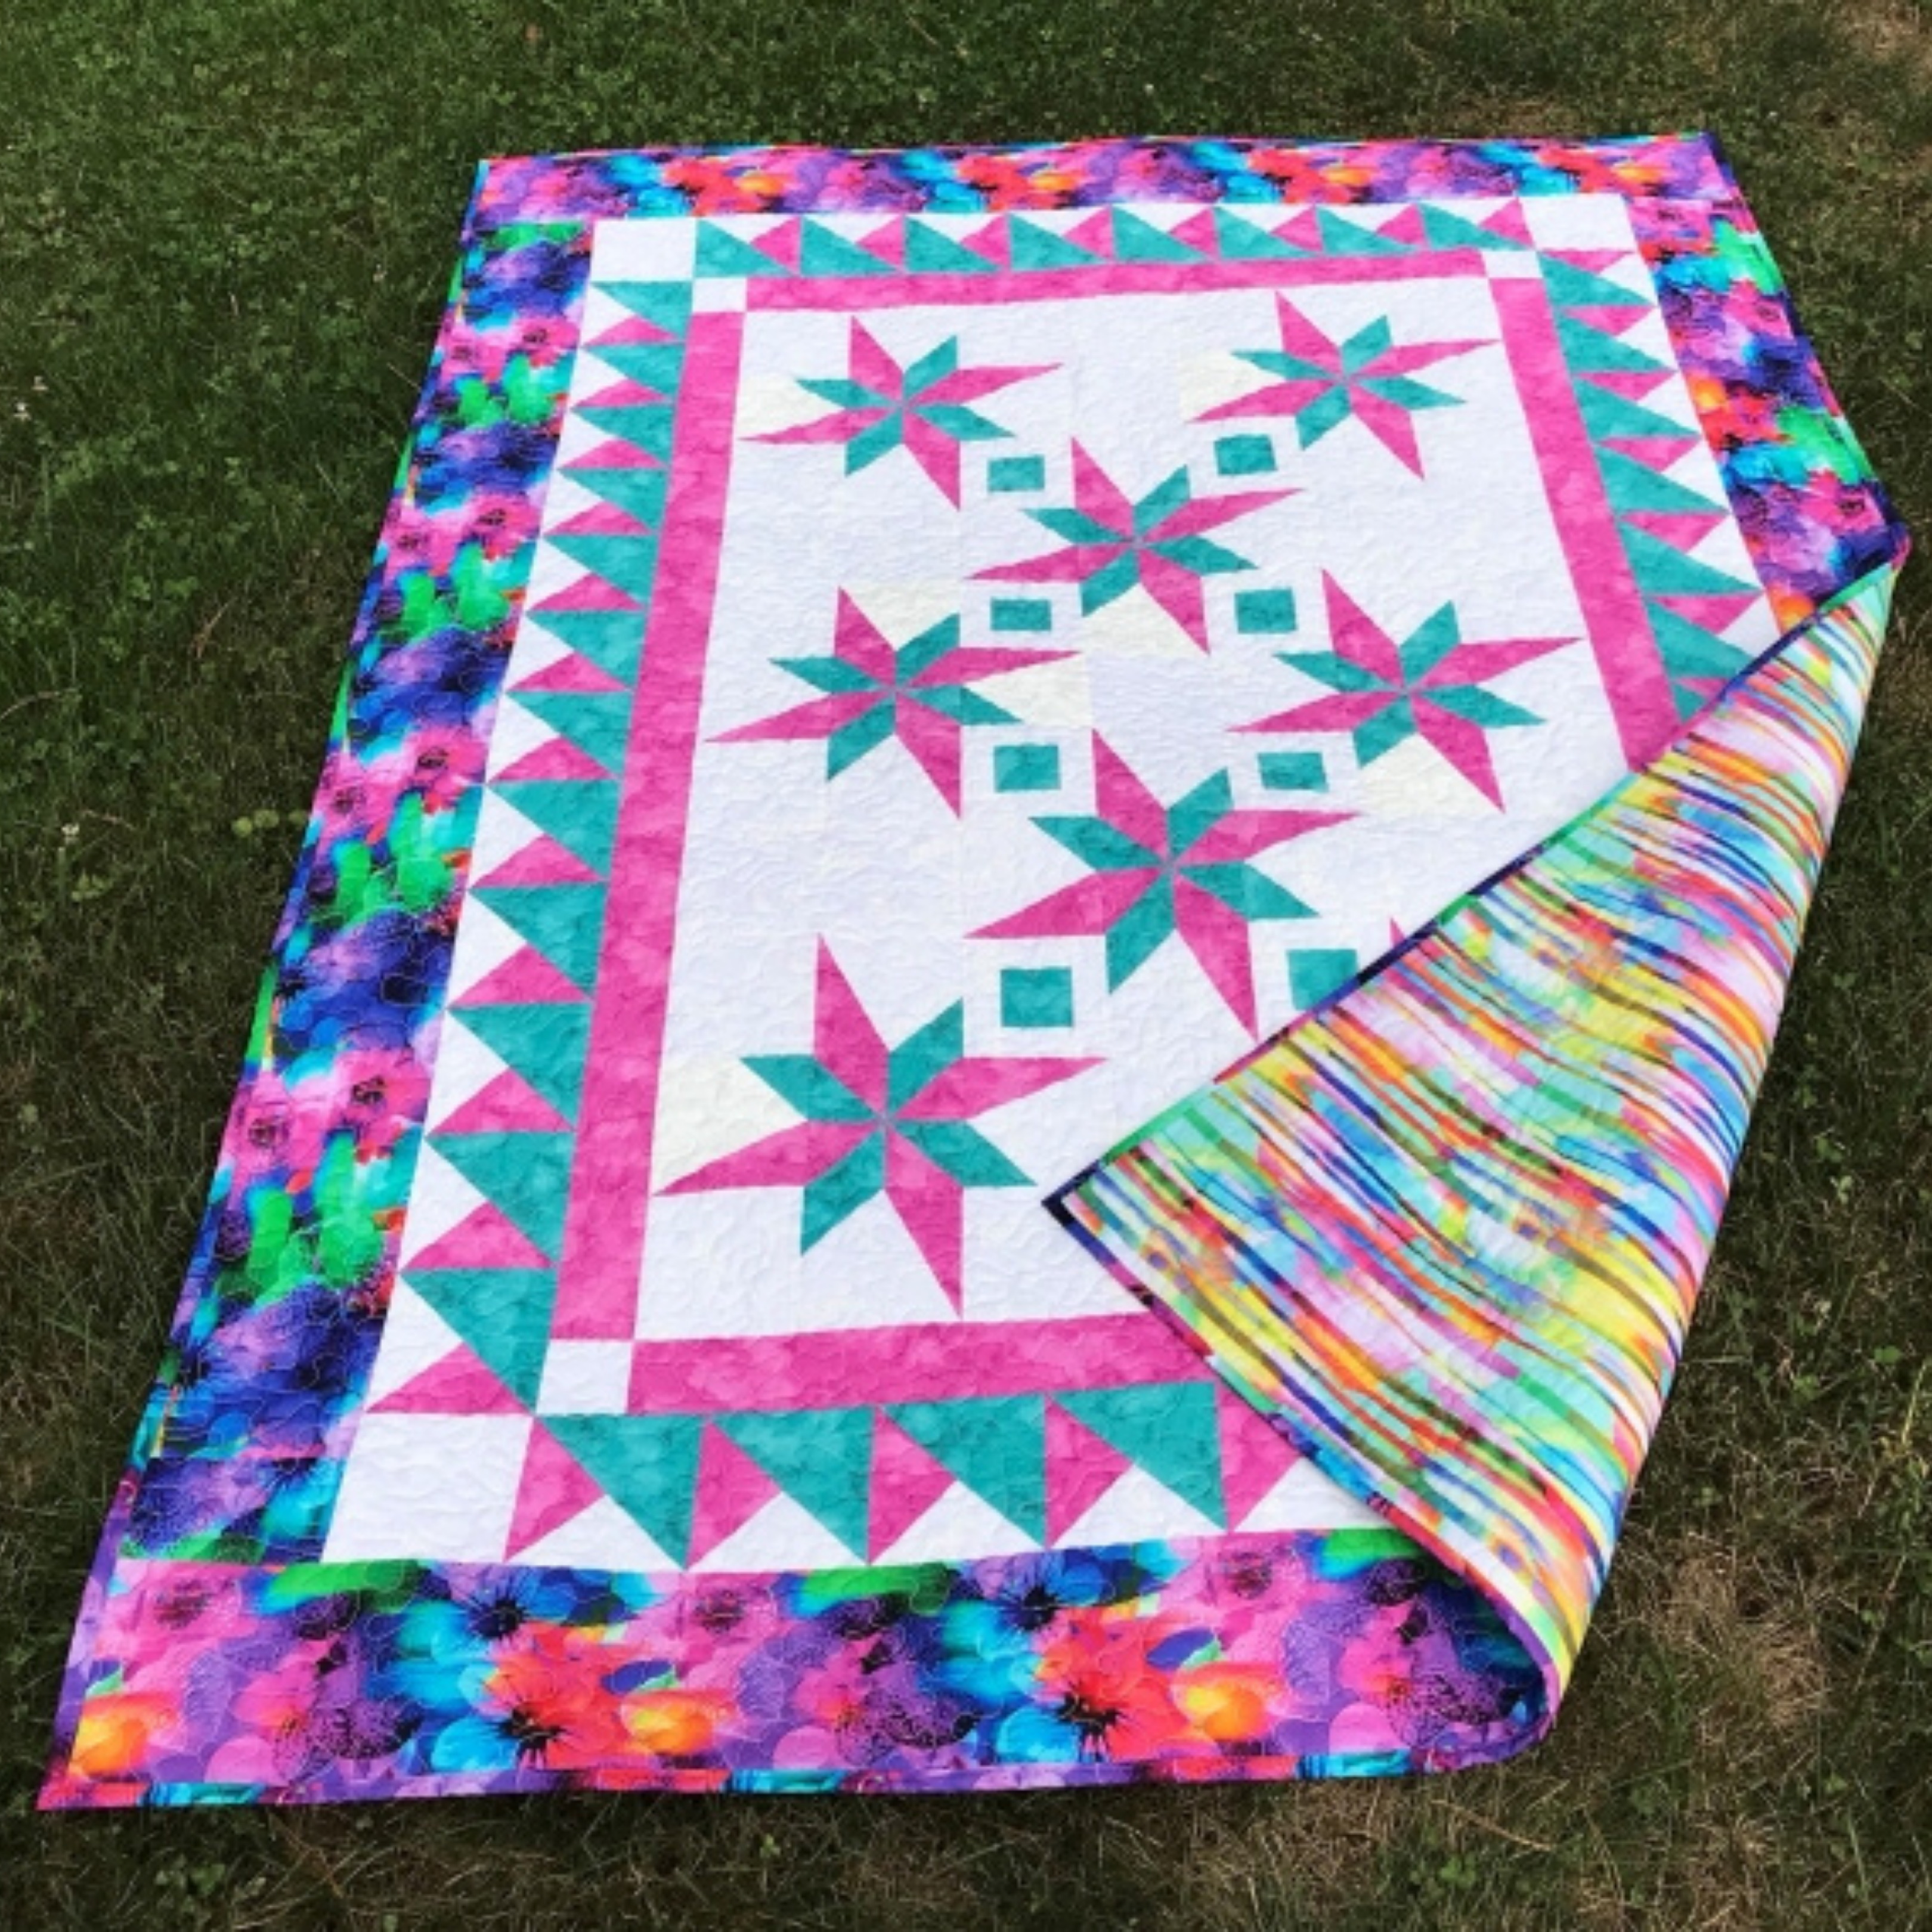 How to make New Year Star Quilt Blanket